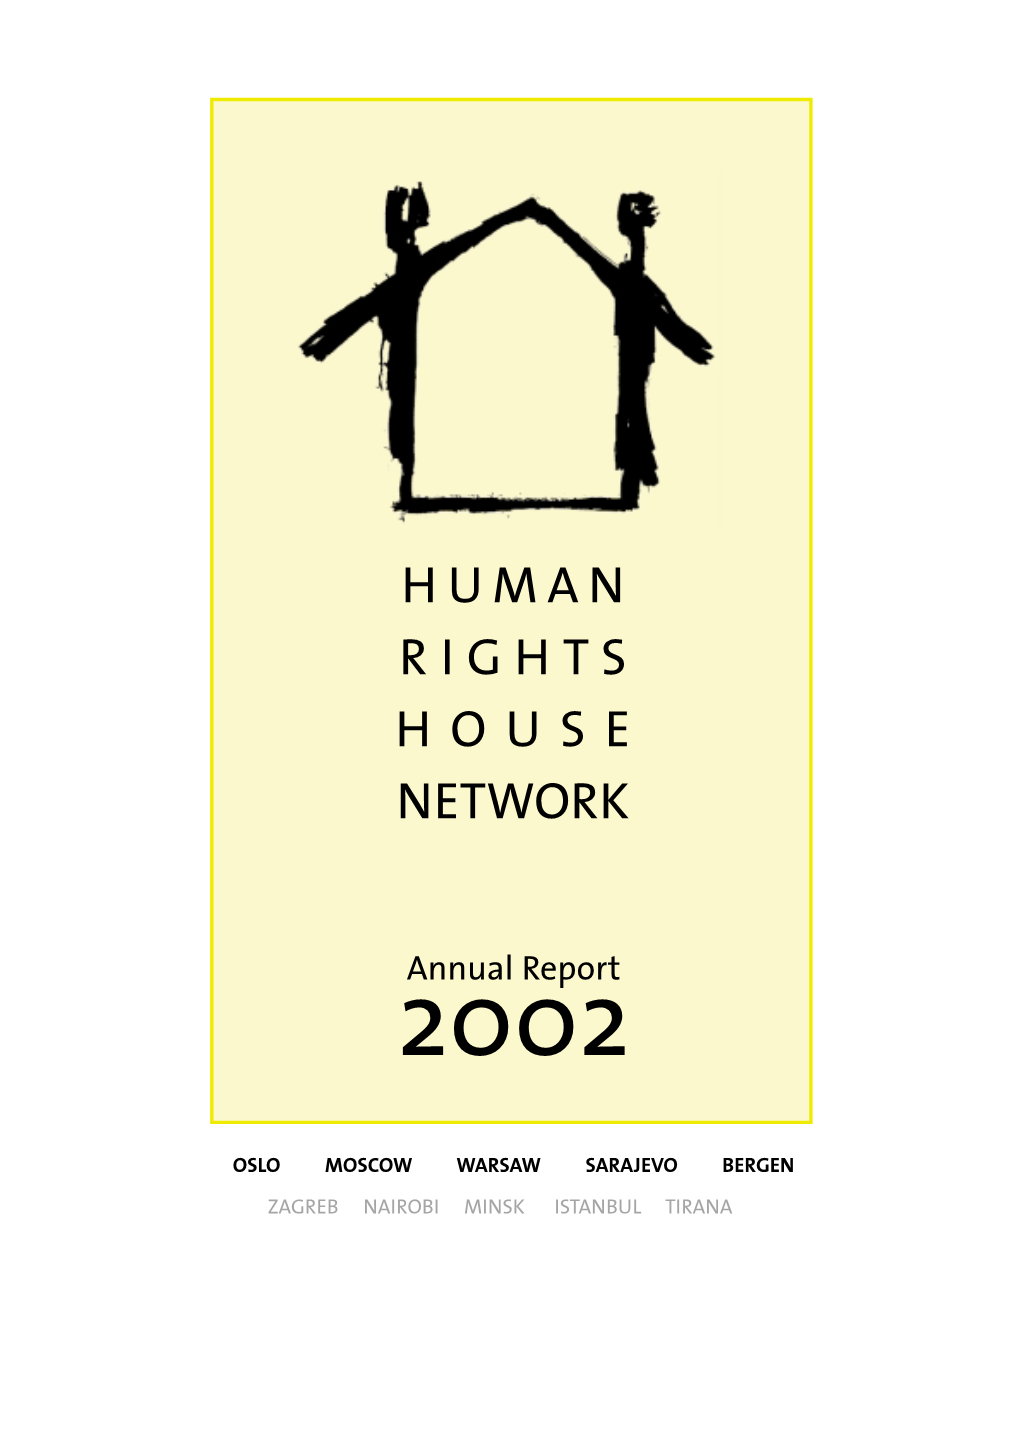 Human Rights House Network